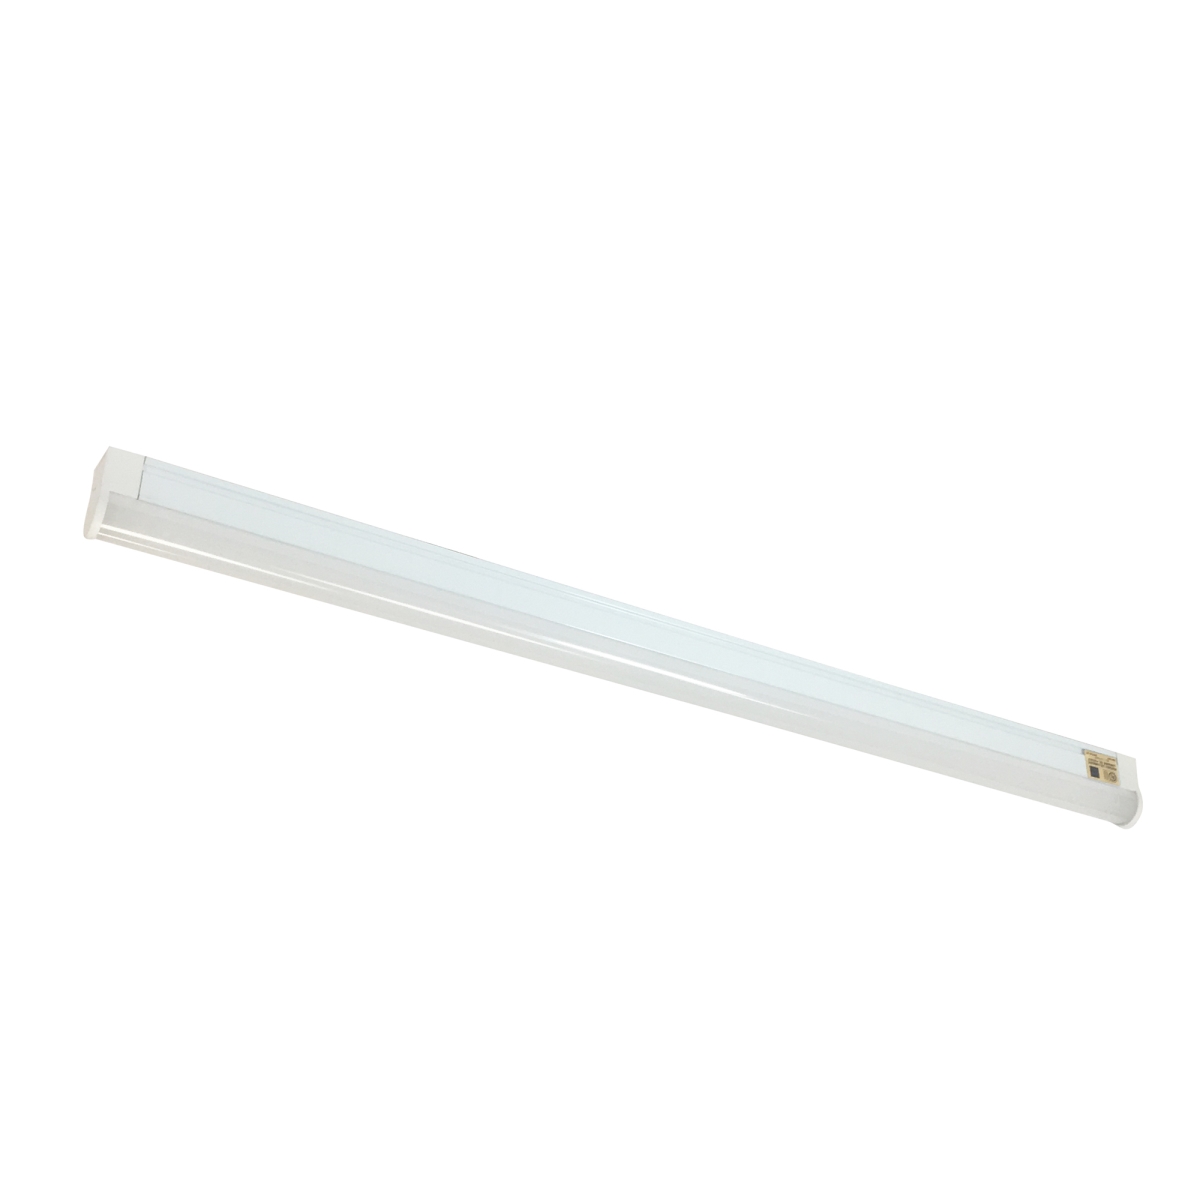 Picture of Nora Lighting NULS-LED3327W 33 in. 2700K Undercabinet Linear LED Fixture - White